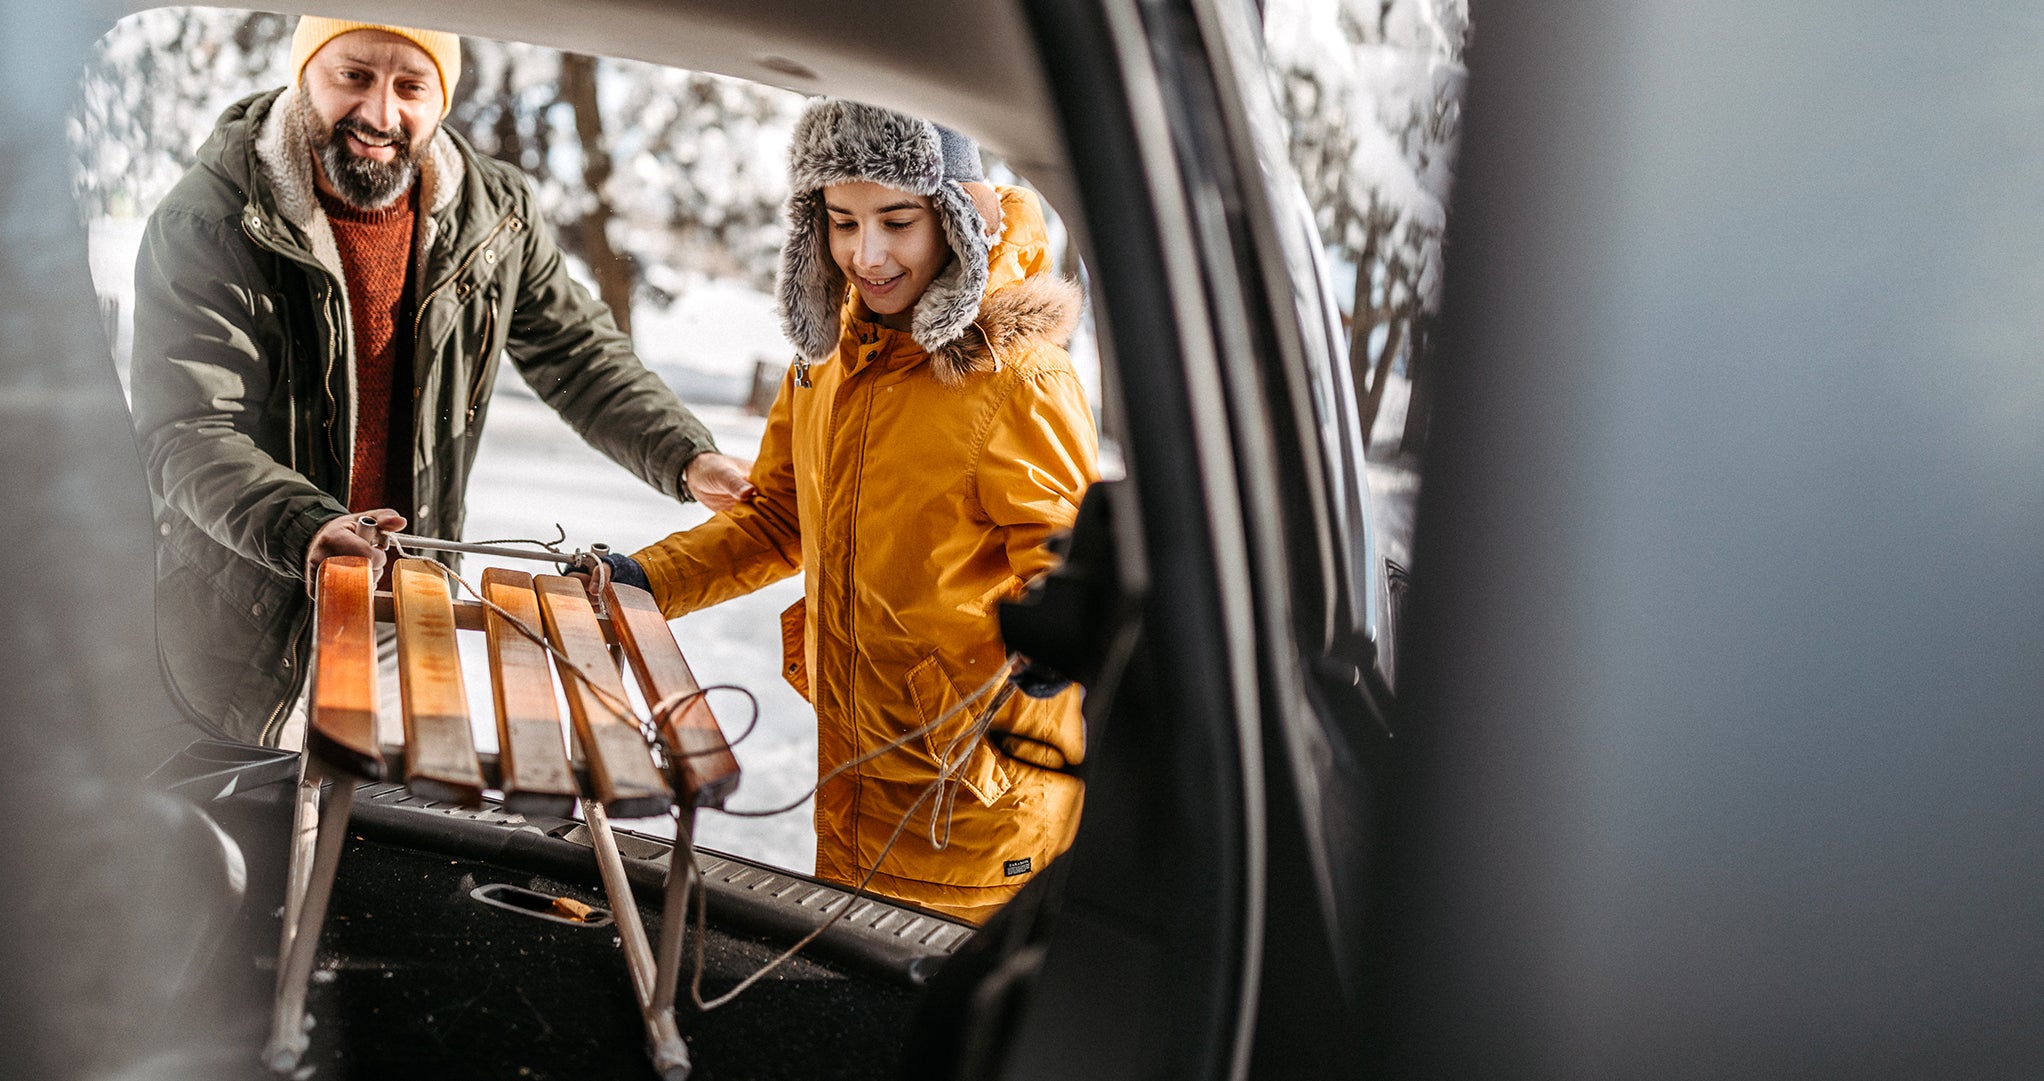 Father and son packing a sled for sledding in the car trunk, dressed in warm clothes.